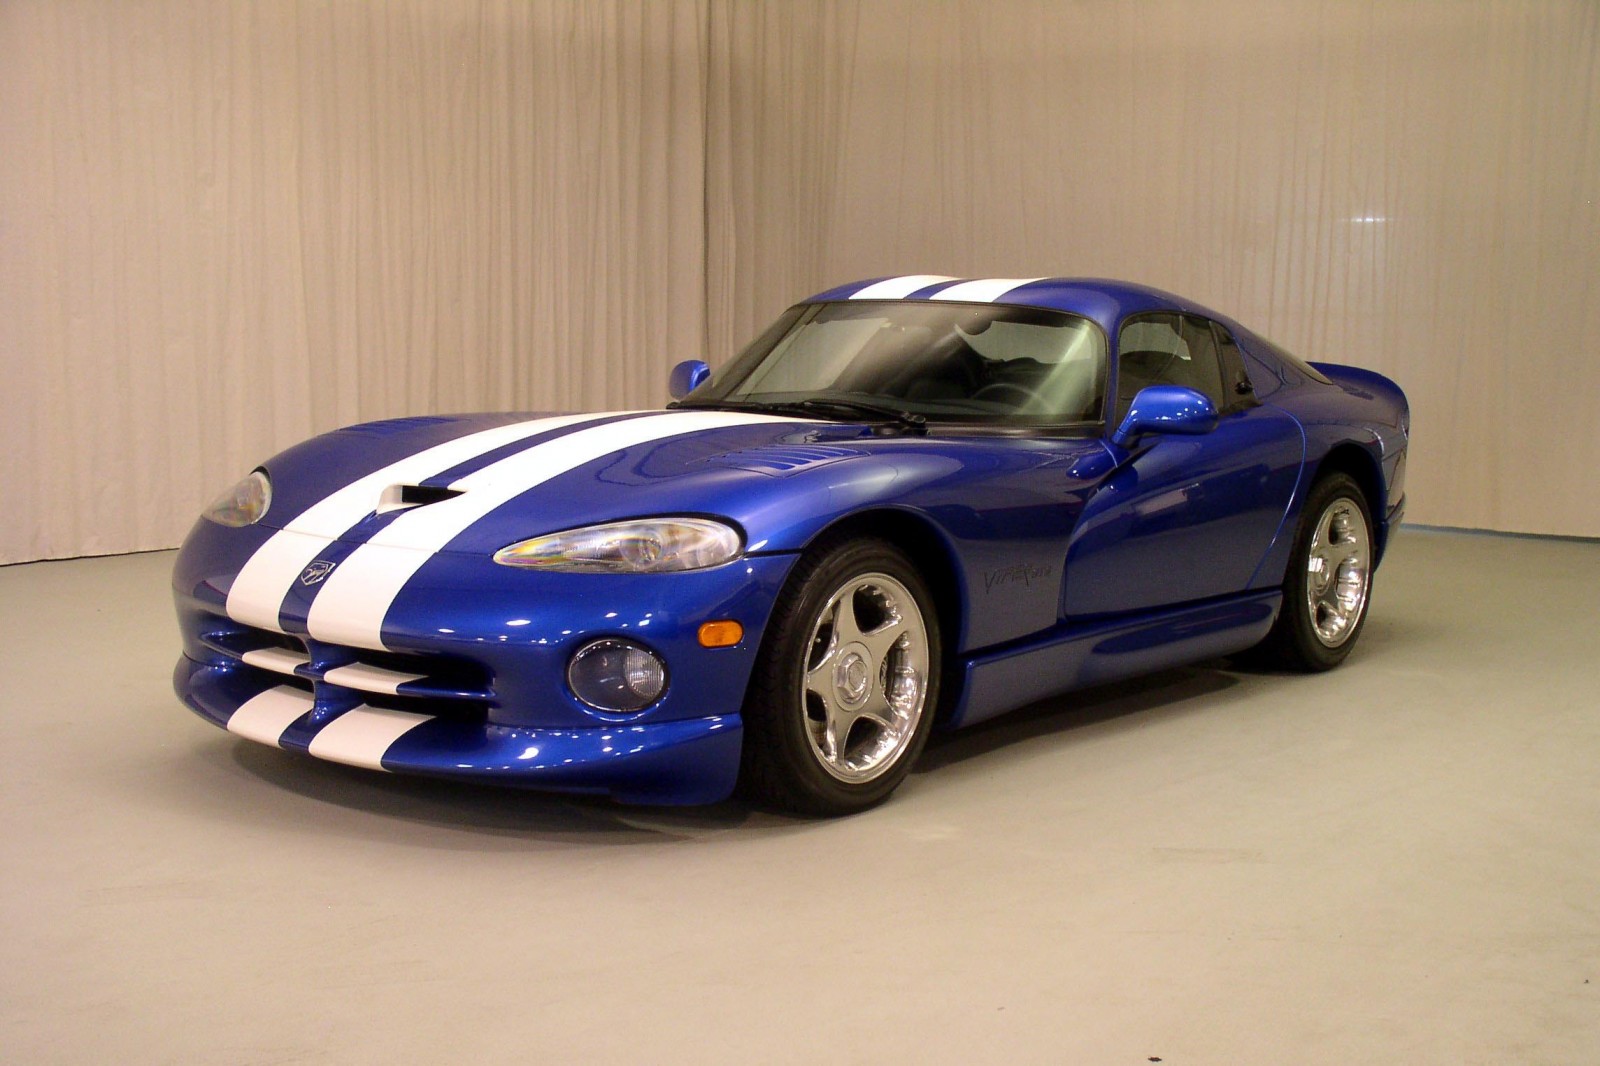 2002 Dodge Viper Coupe Shown - see full photo gallery.